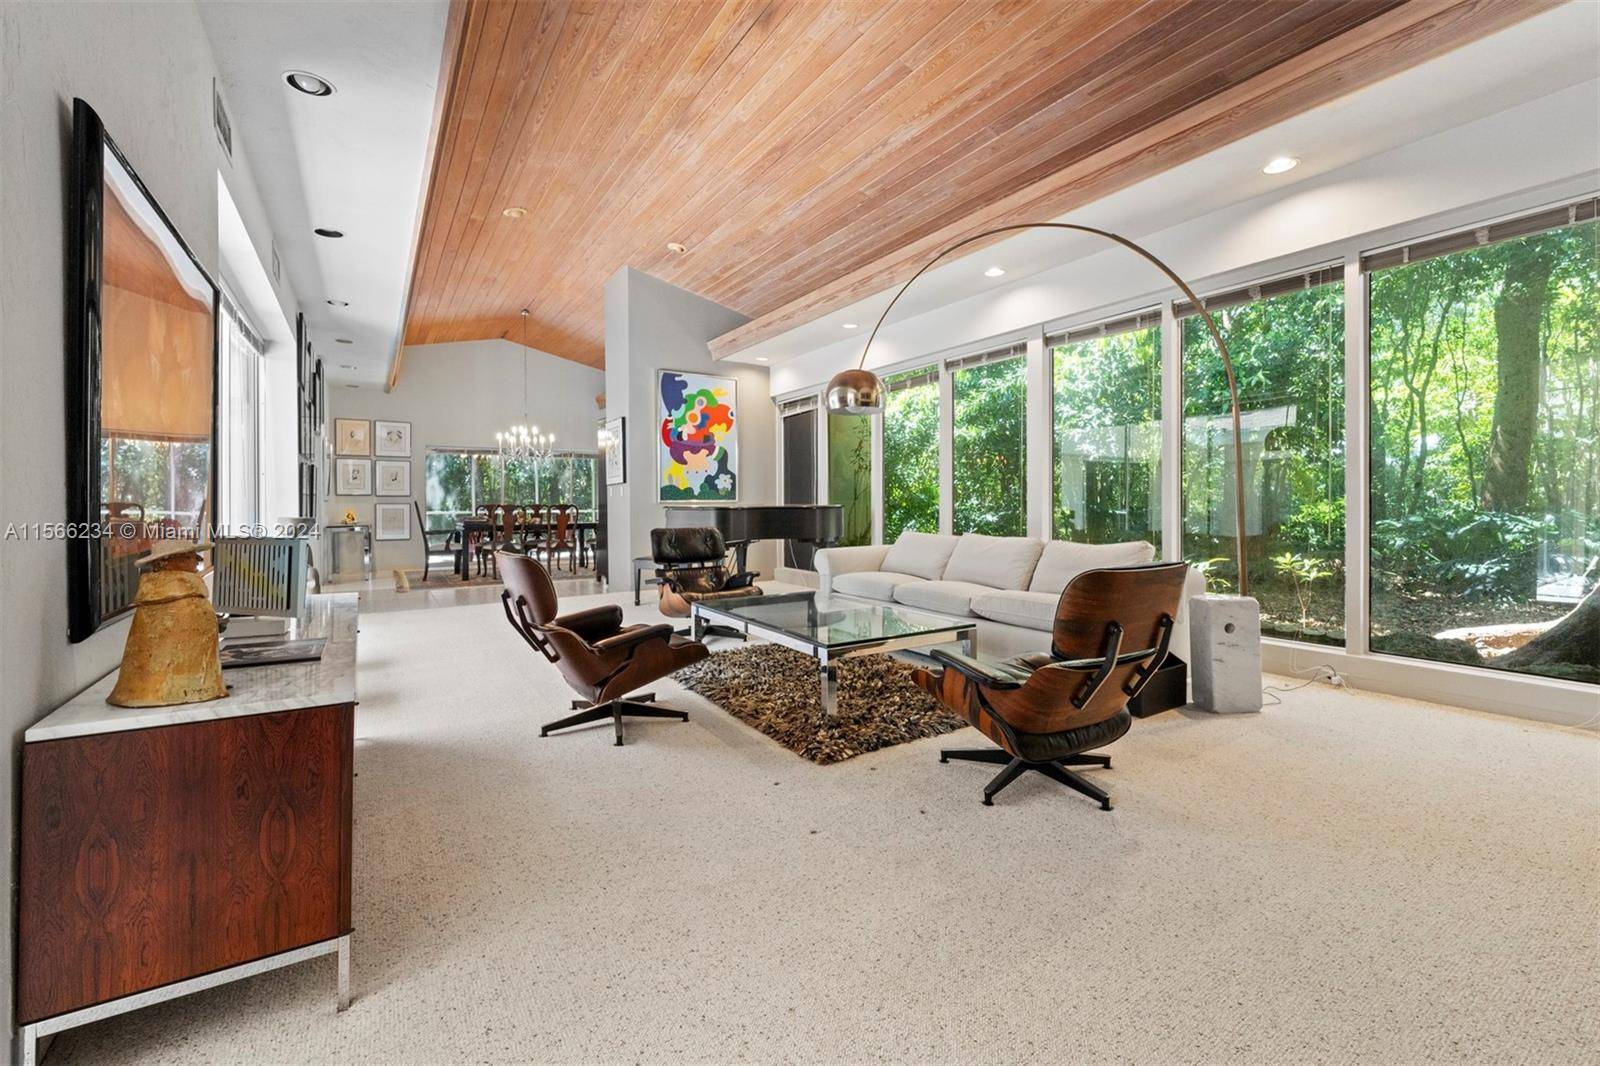 Welcome to your slice of midcentury modern paradise nestled within a lush, verdant oasis.